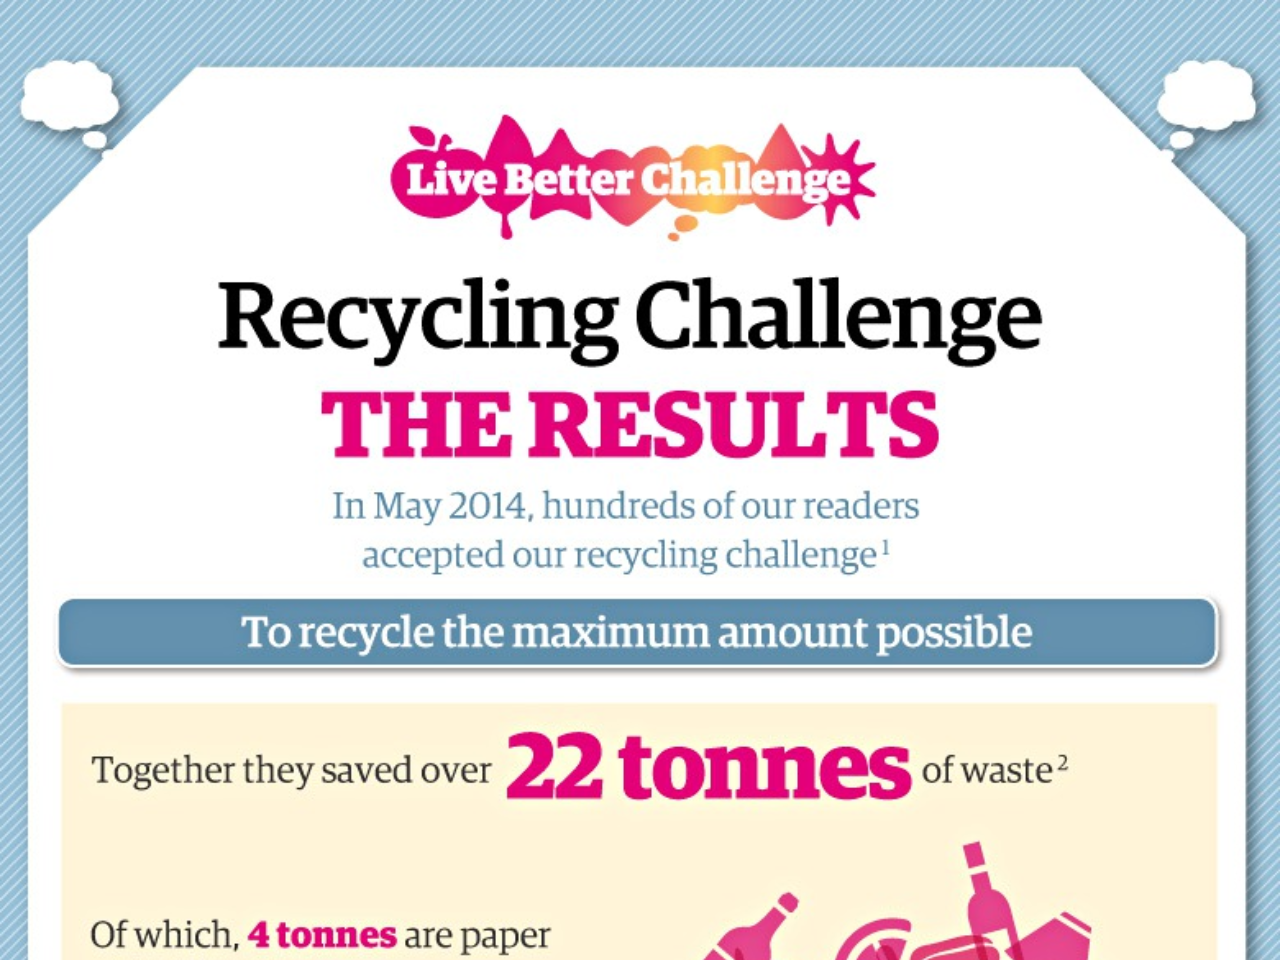 Live Better: Reduce, Reuse, Recycle Challenge Results